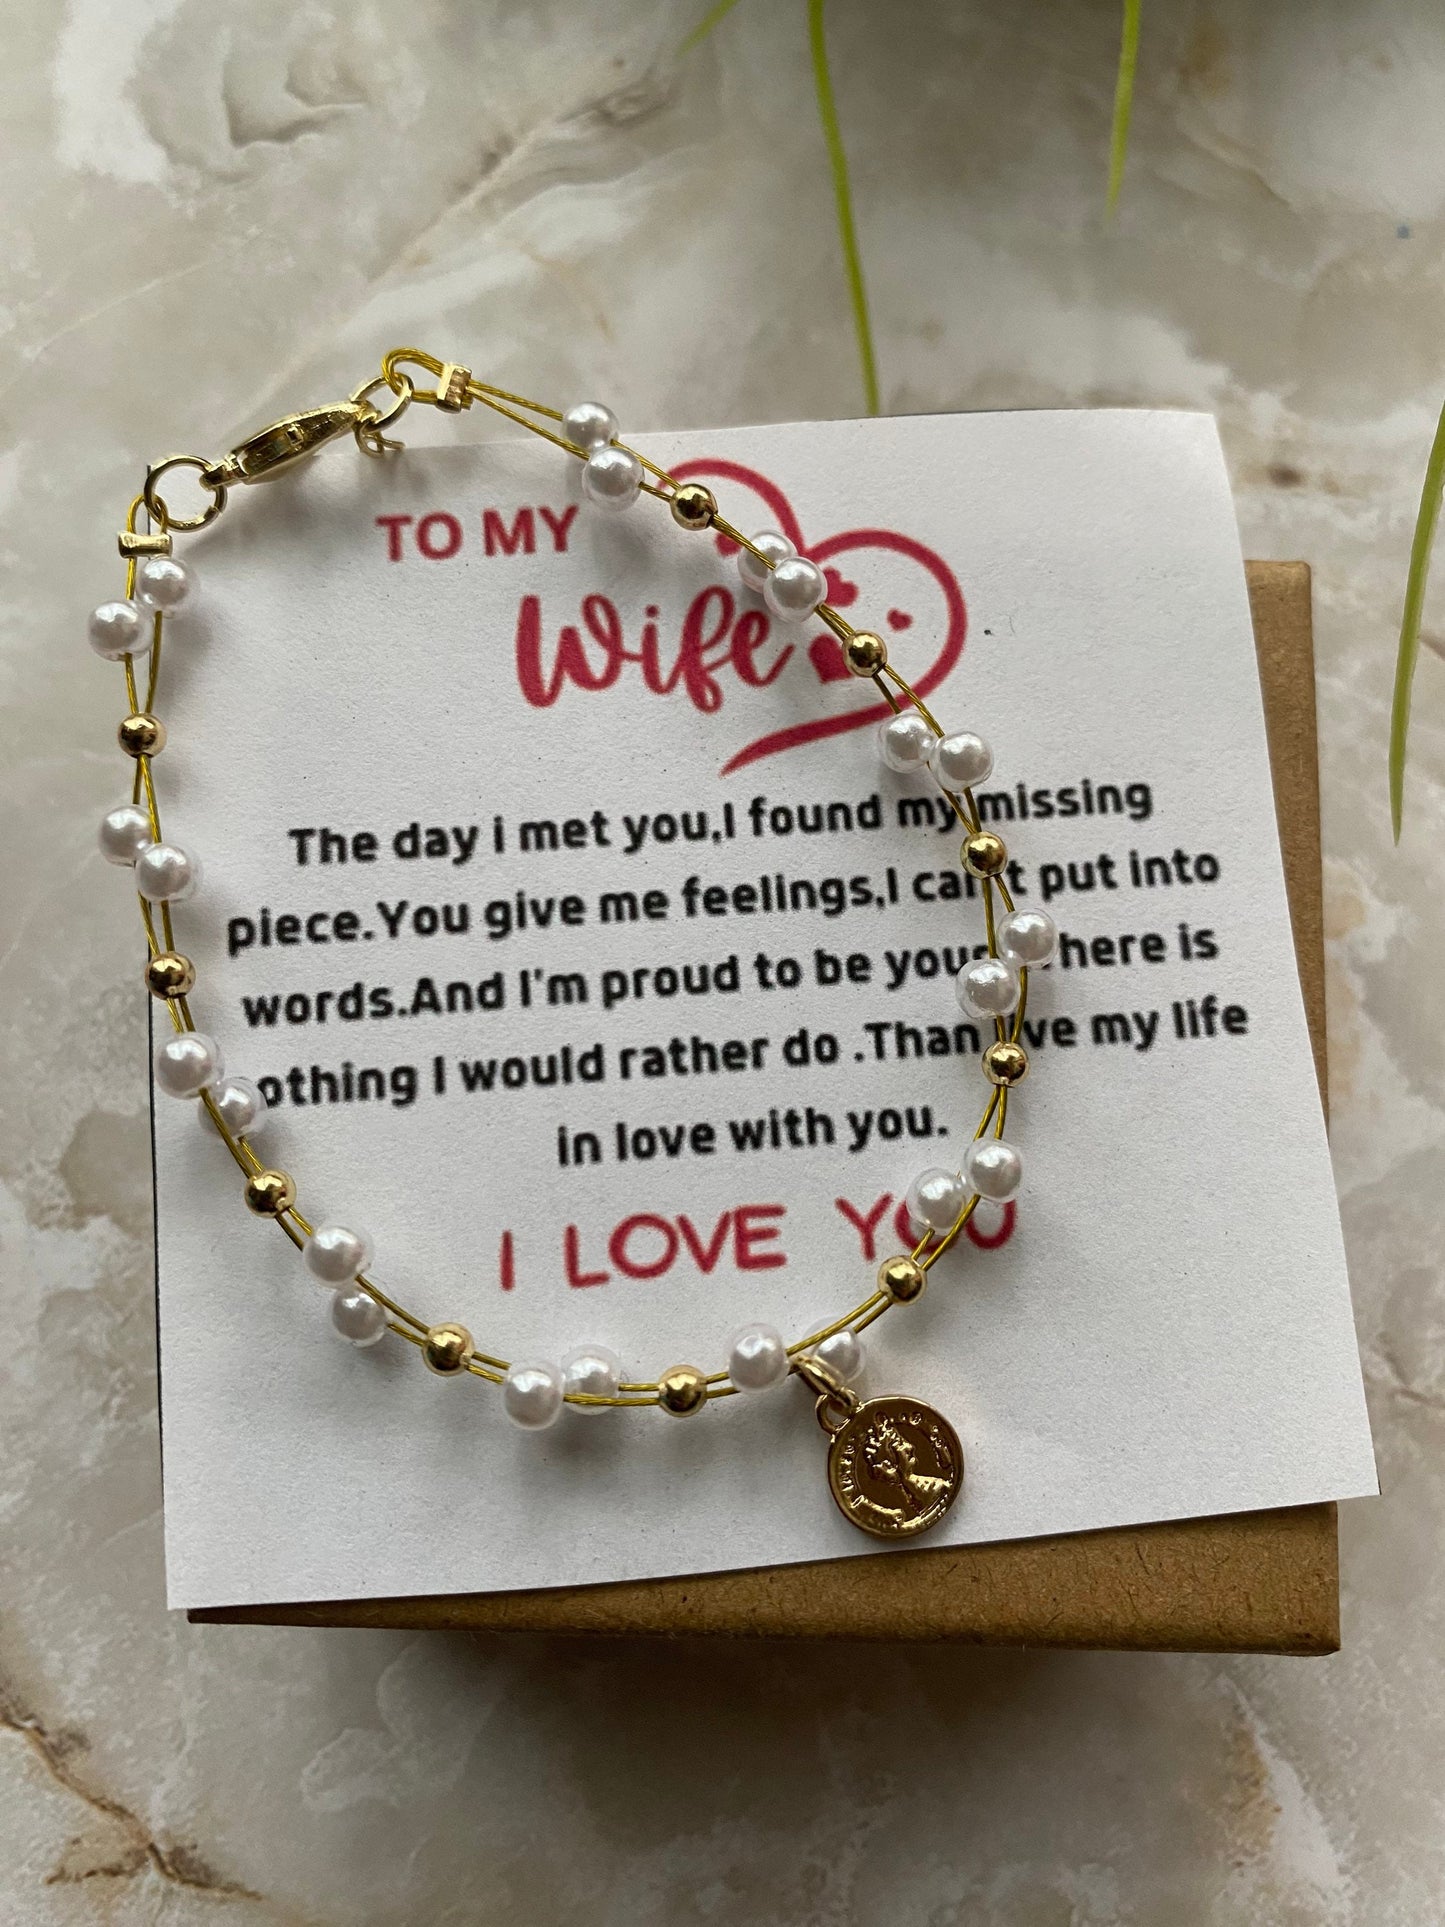 To my wife jewelry, Valentine’s Day gift for girlfriend, pearl bracelet for her,message card for Valentine’s Day,To my soulmate gift